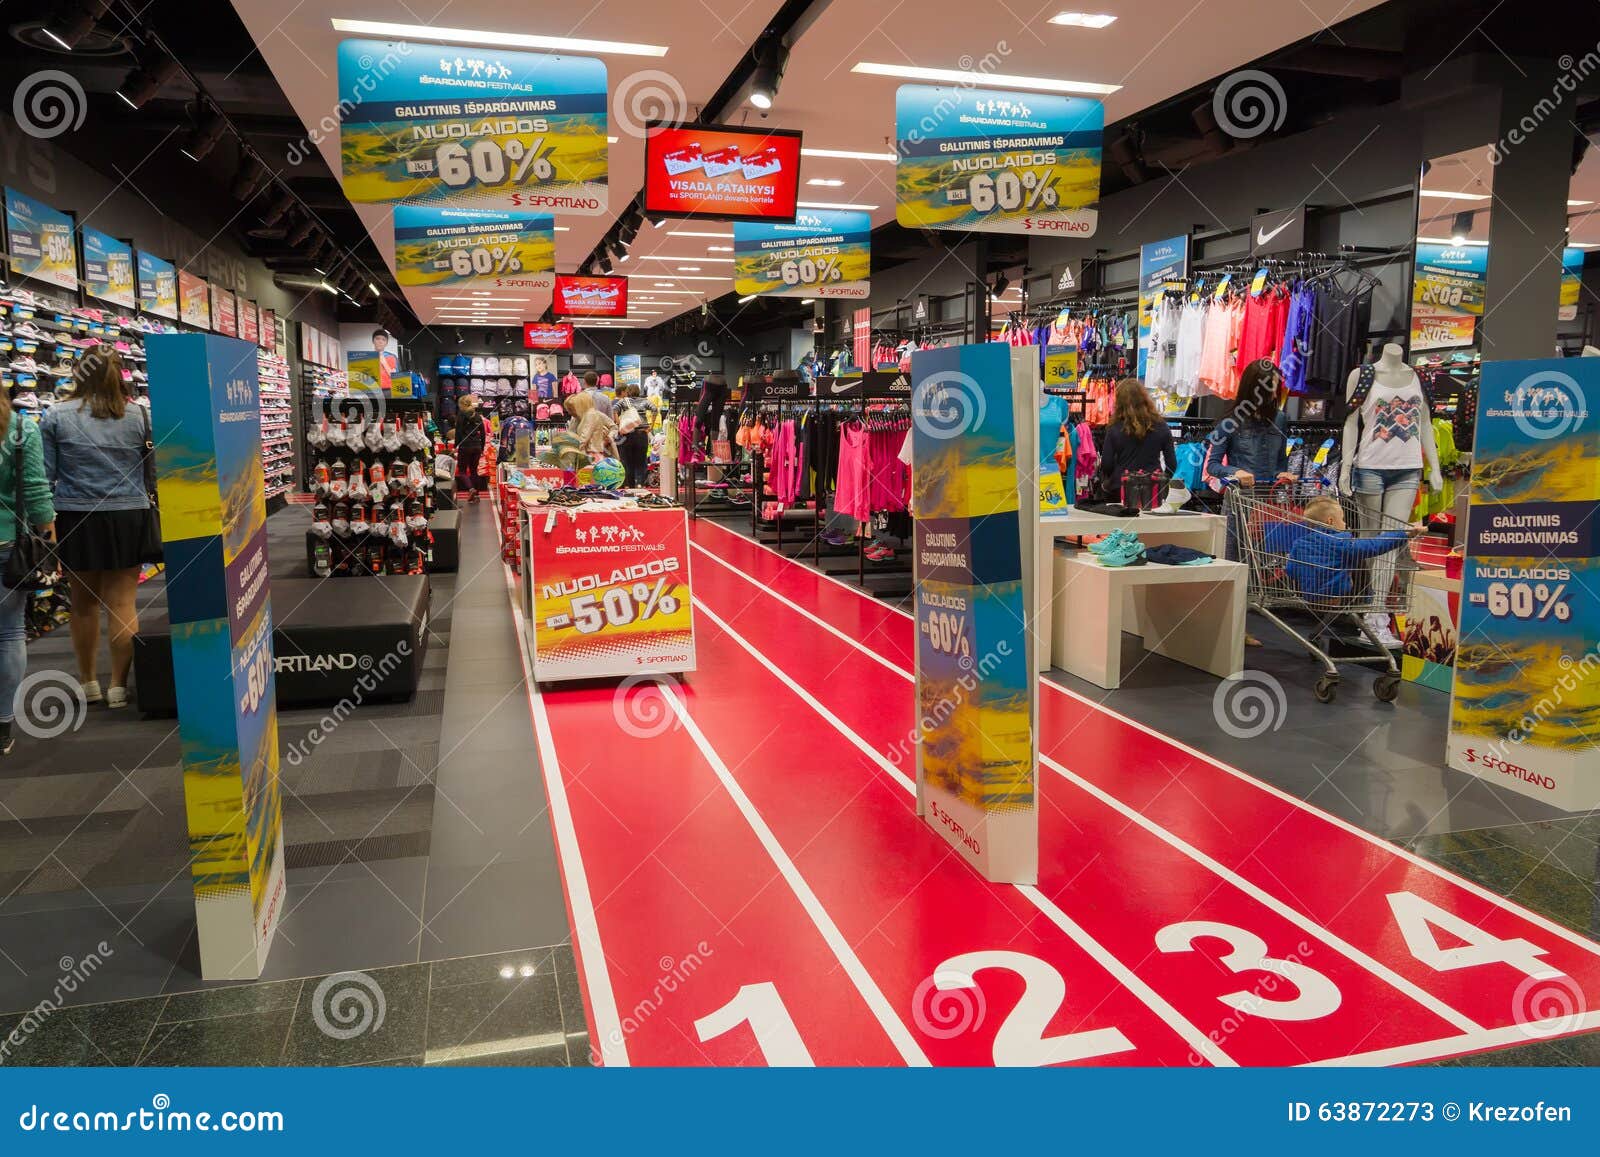 The Acropolis Store in KLAIPEDA Editorial Stock Photo - Image of ...